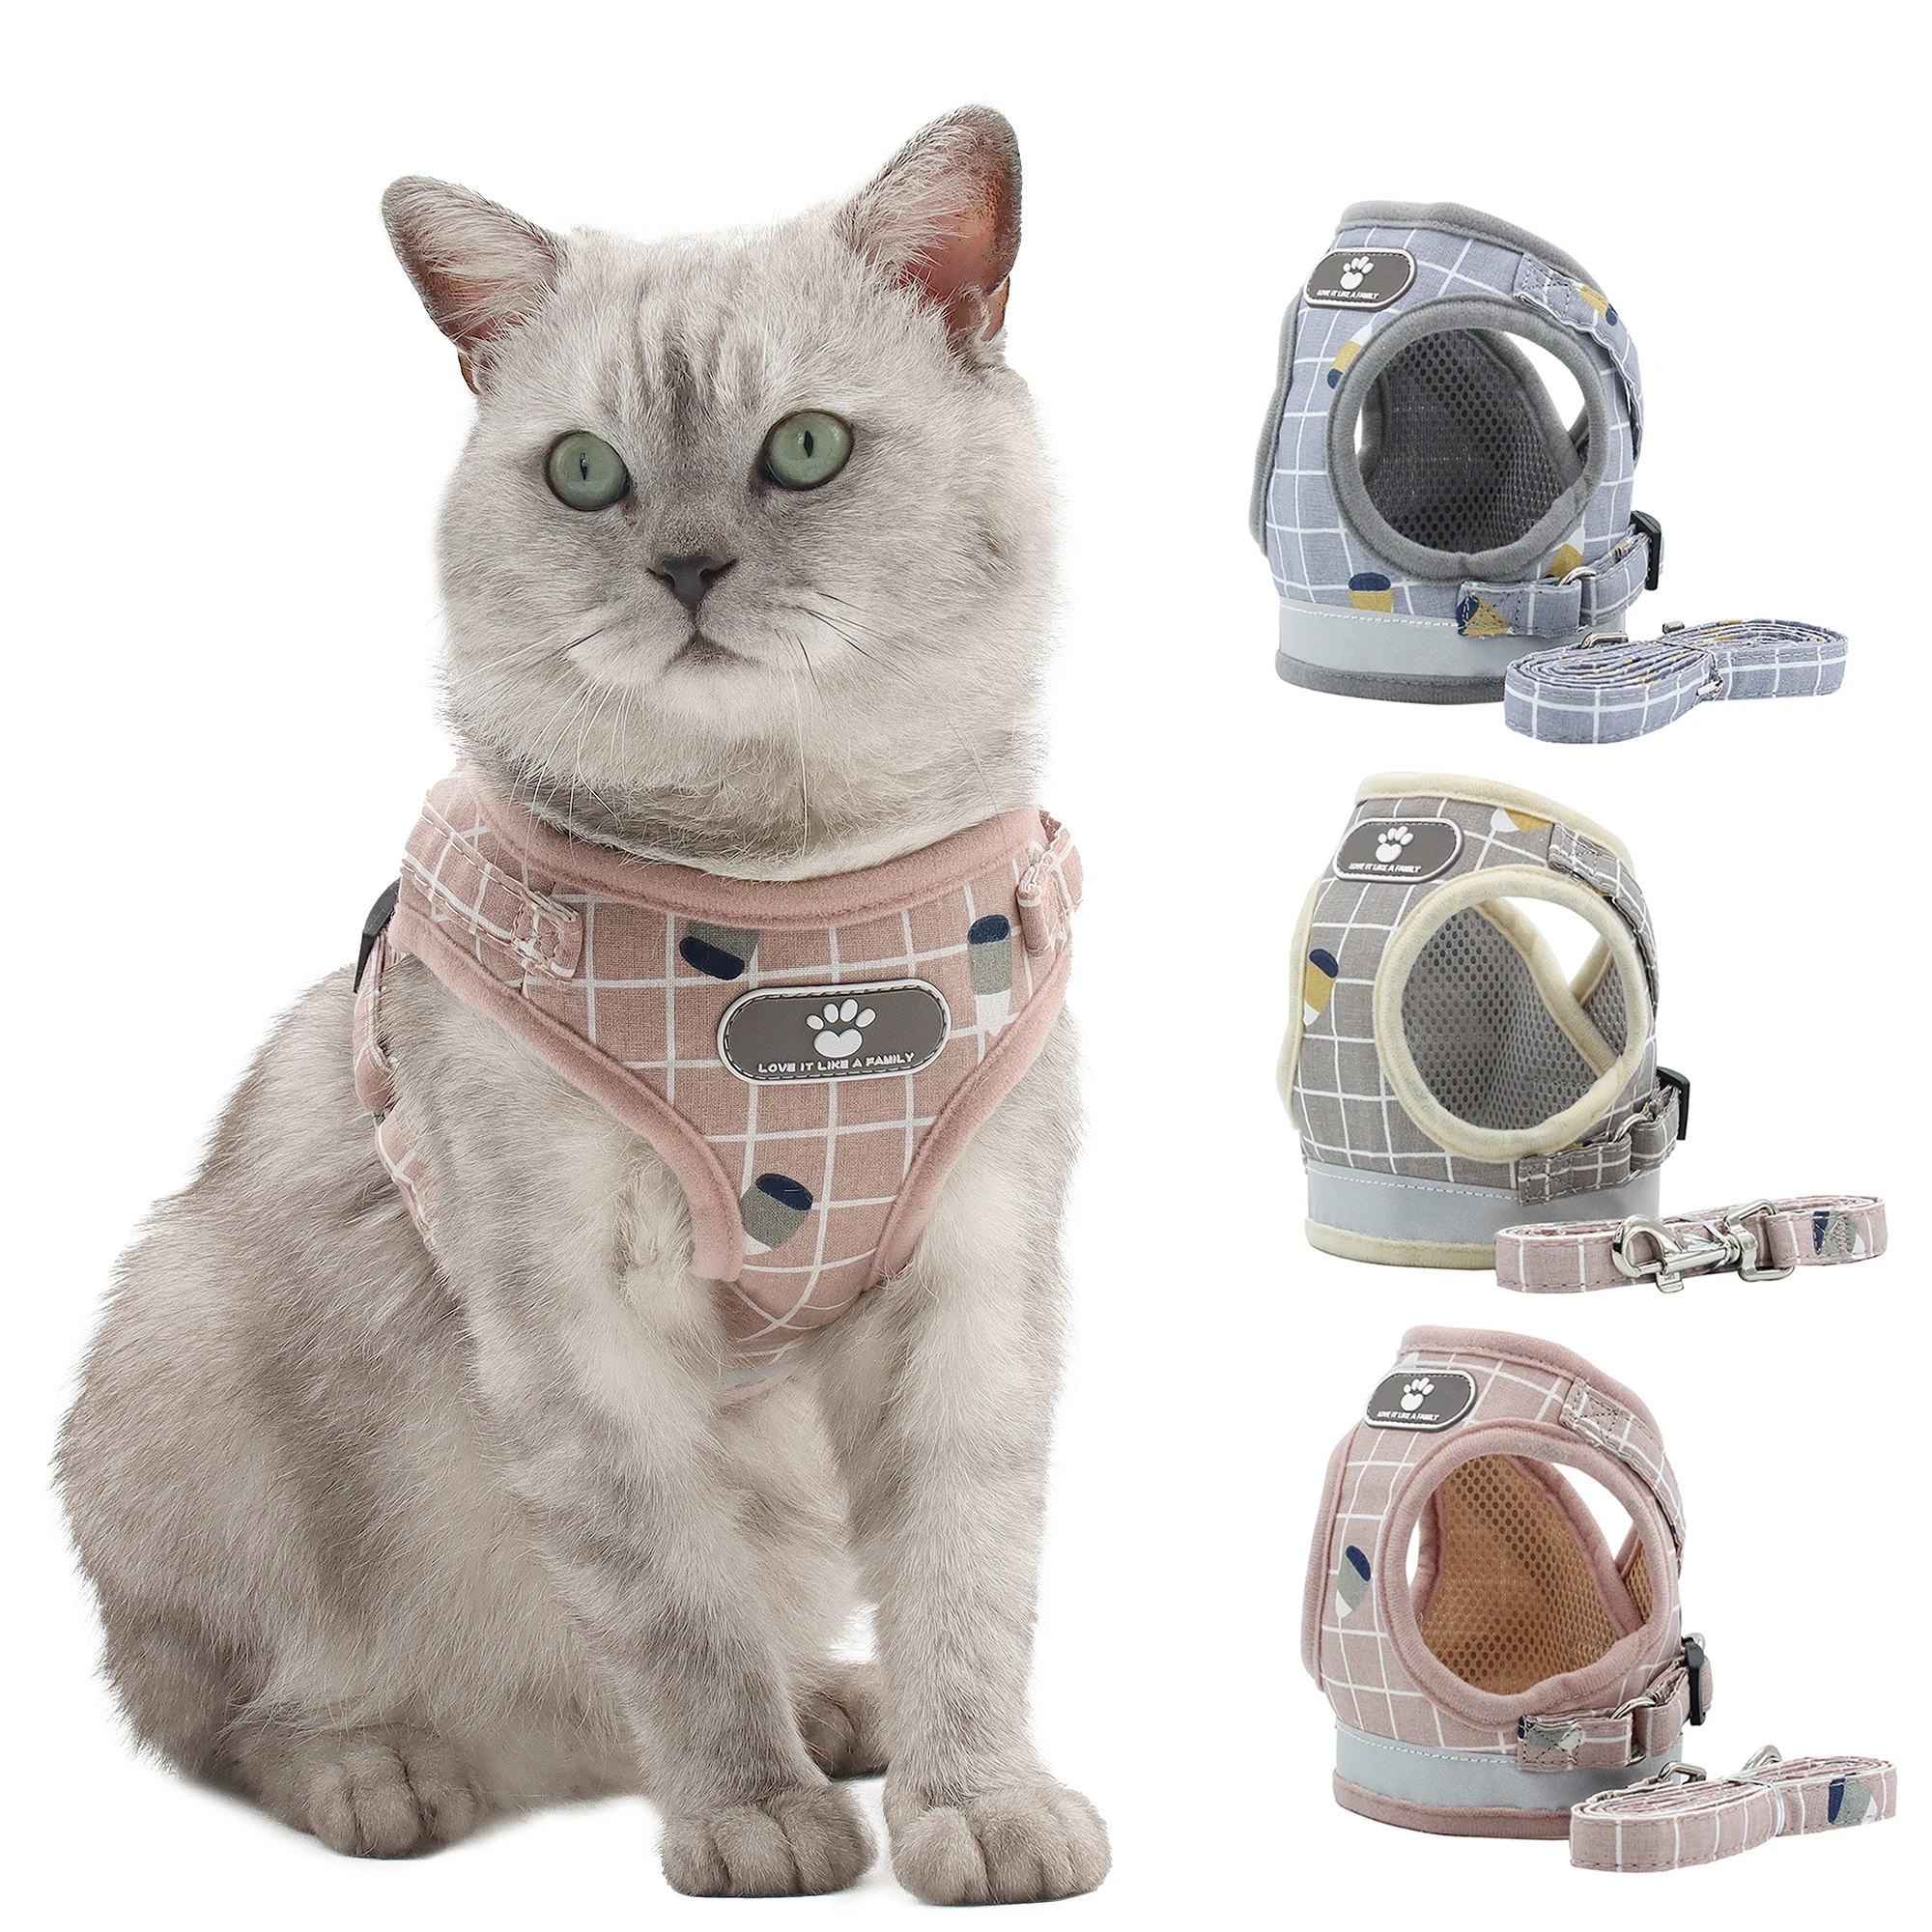 

Cat Harness Reflective Breathable Mesh Vest Small Dog Cat Vest Harnesses Leash Pug Chihuahua Pet Supplies Puppy Kitten Collars